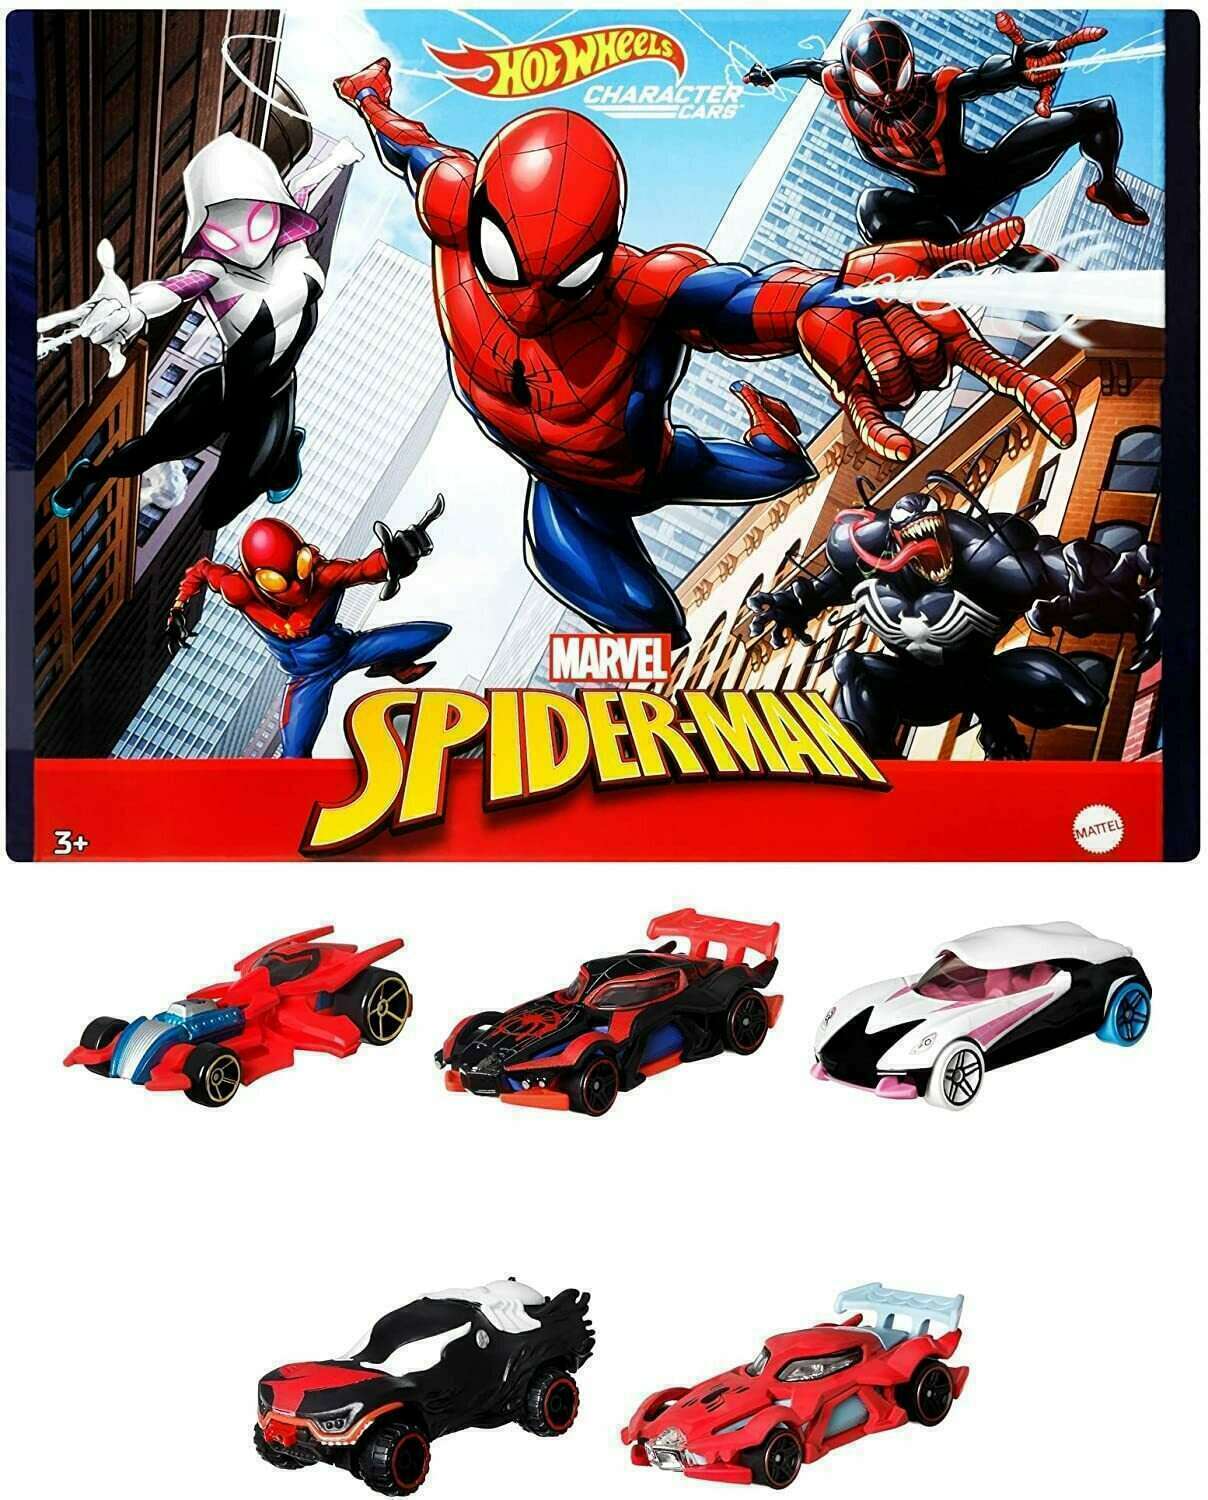 Hot Wheels 2021 - Character Cars / Gift Pack - Marvel Spider-man - Includes Spider-Man, Spider-Man in Proto-Suit, Miles Morales, Spider-Gwen & Venom - Boxed Set - MPN HBY36